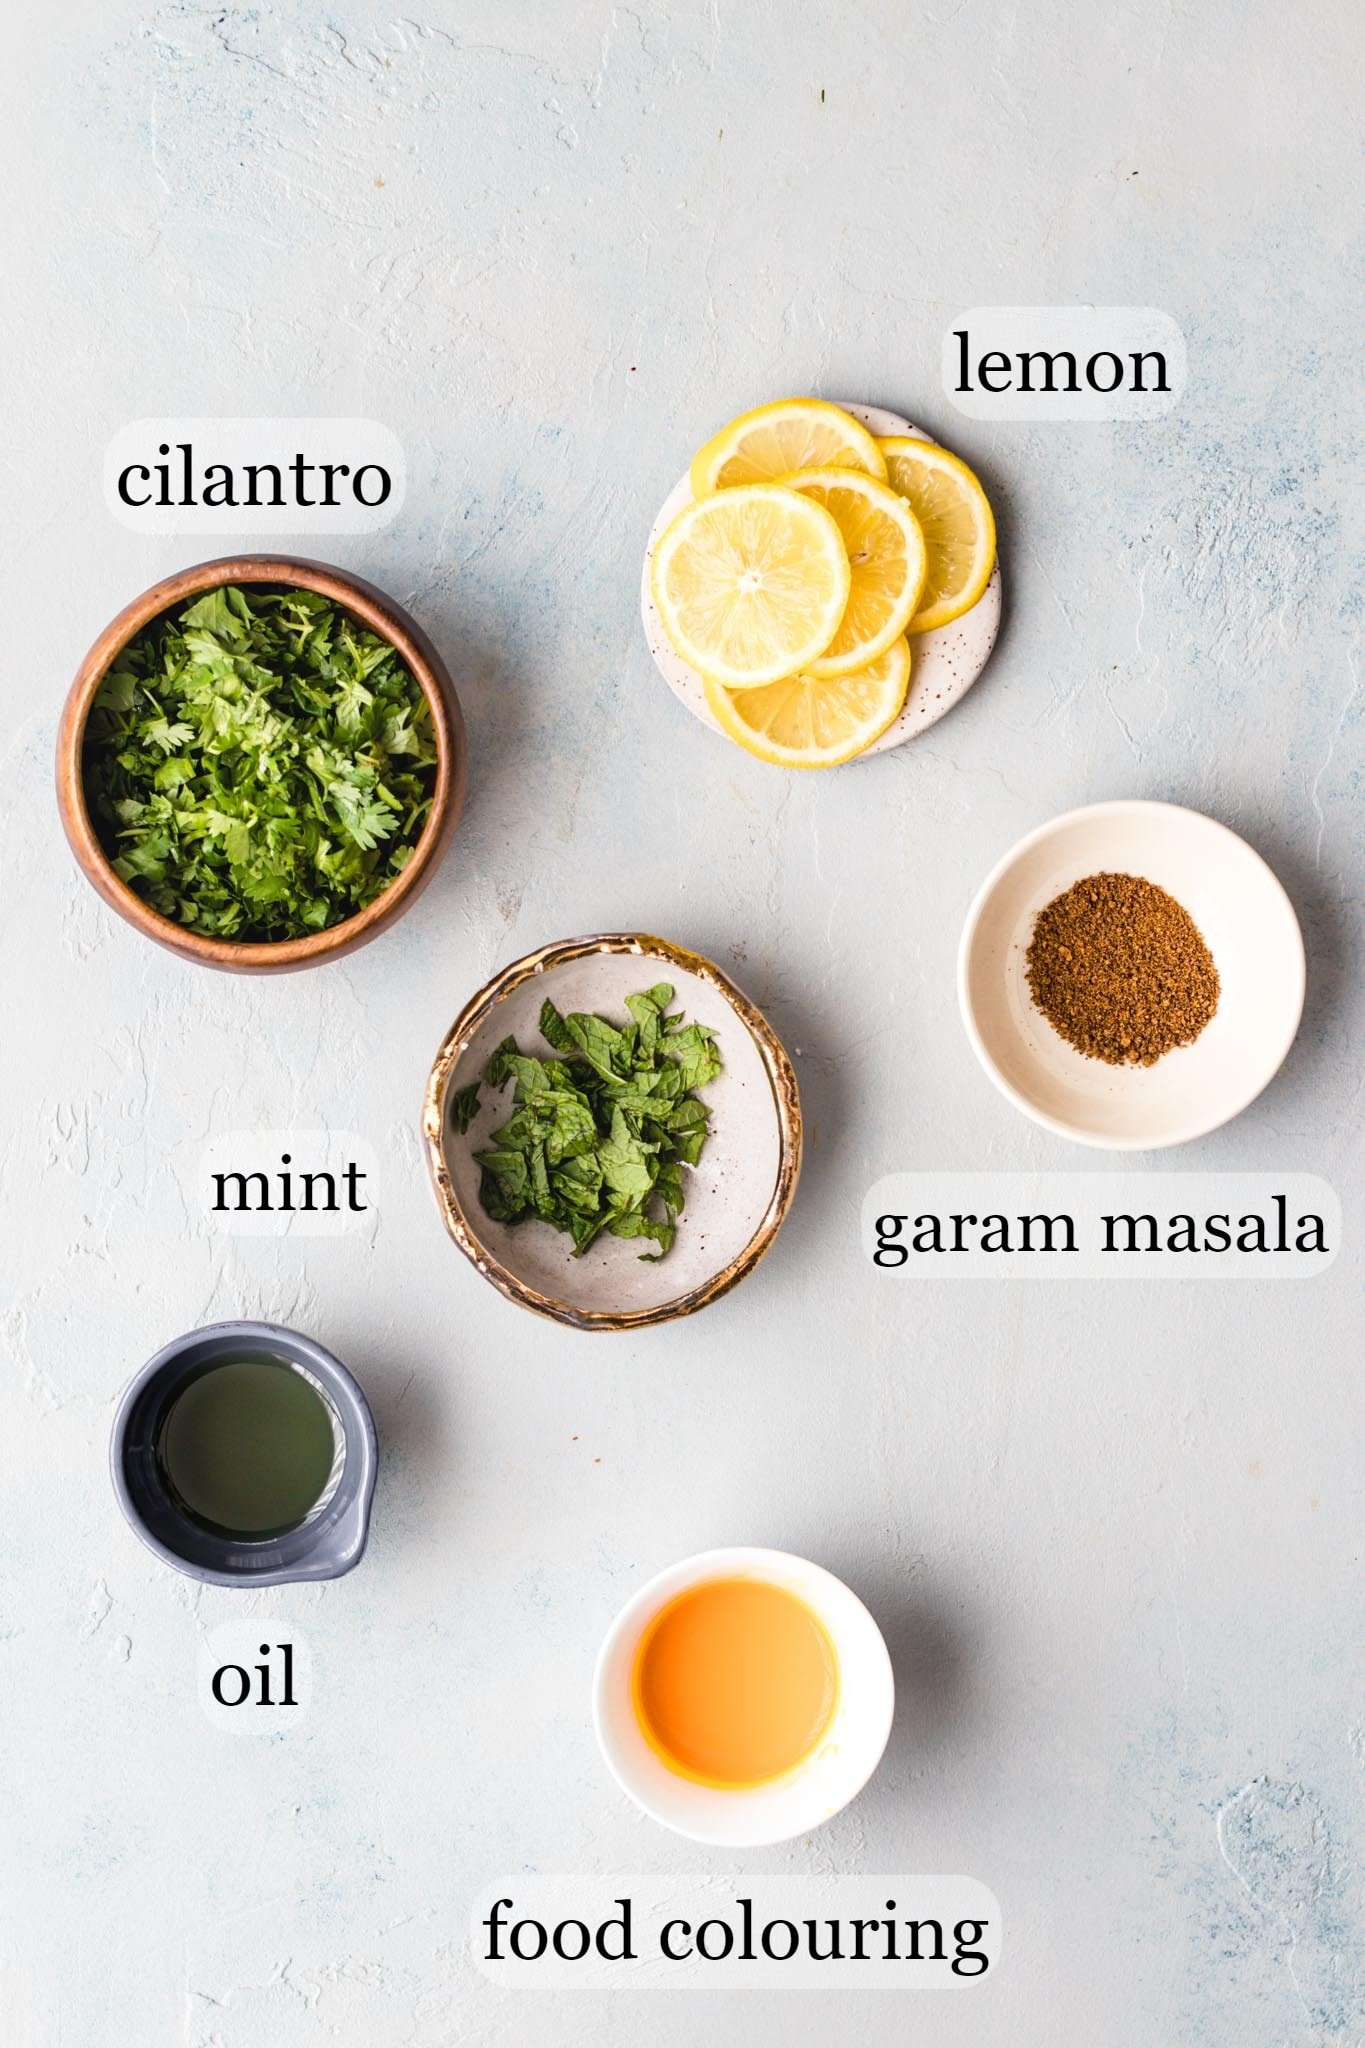 Ingredients for layering and topping the chicken biryani such as cilantro, mint, lemon slices, oil, and food colored milk